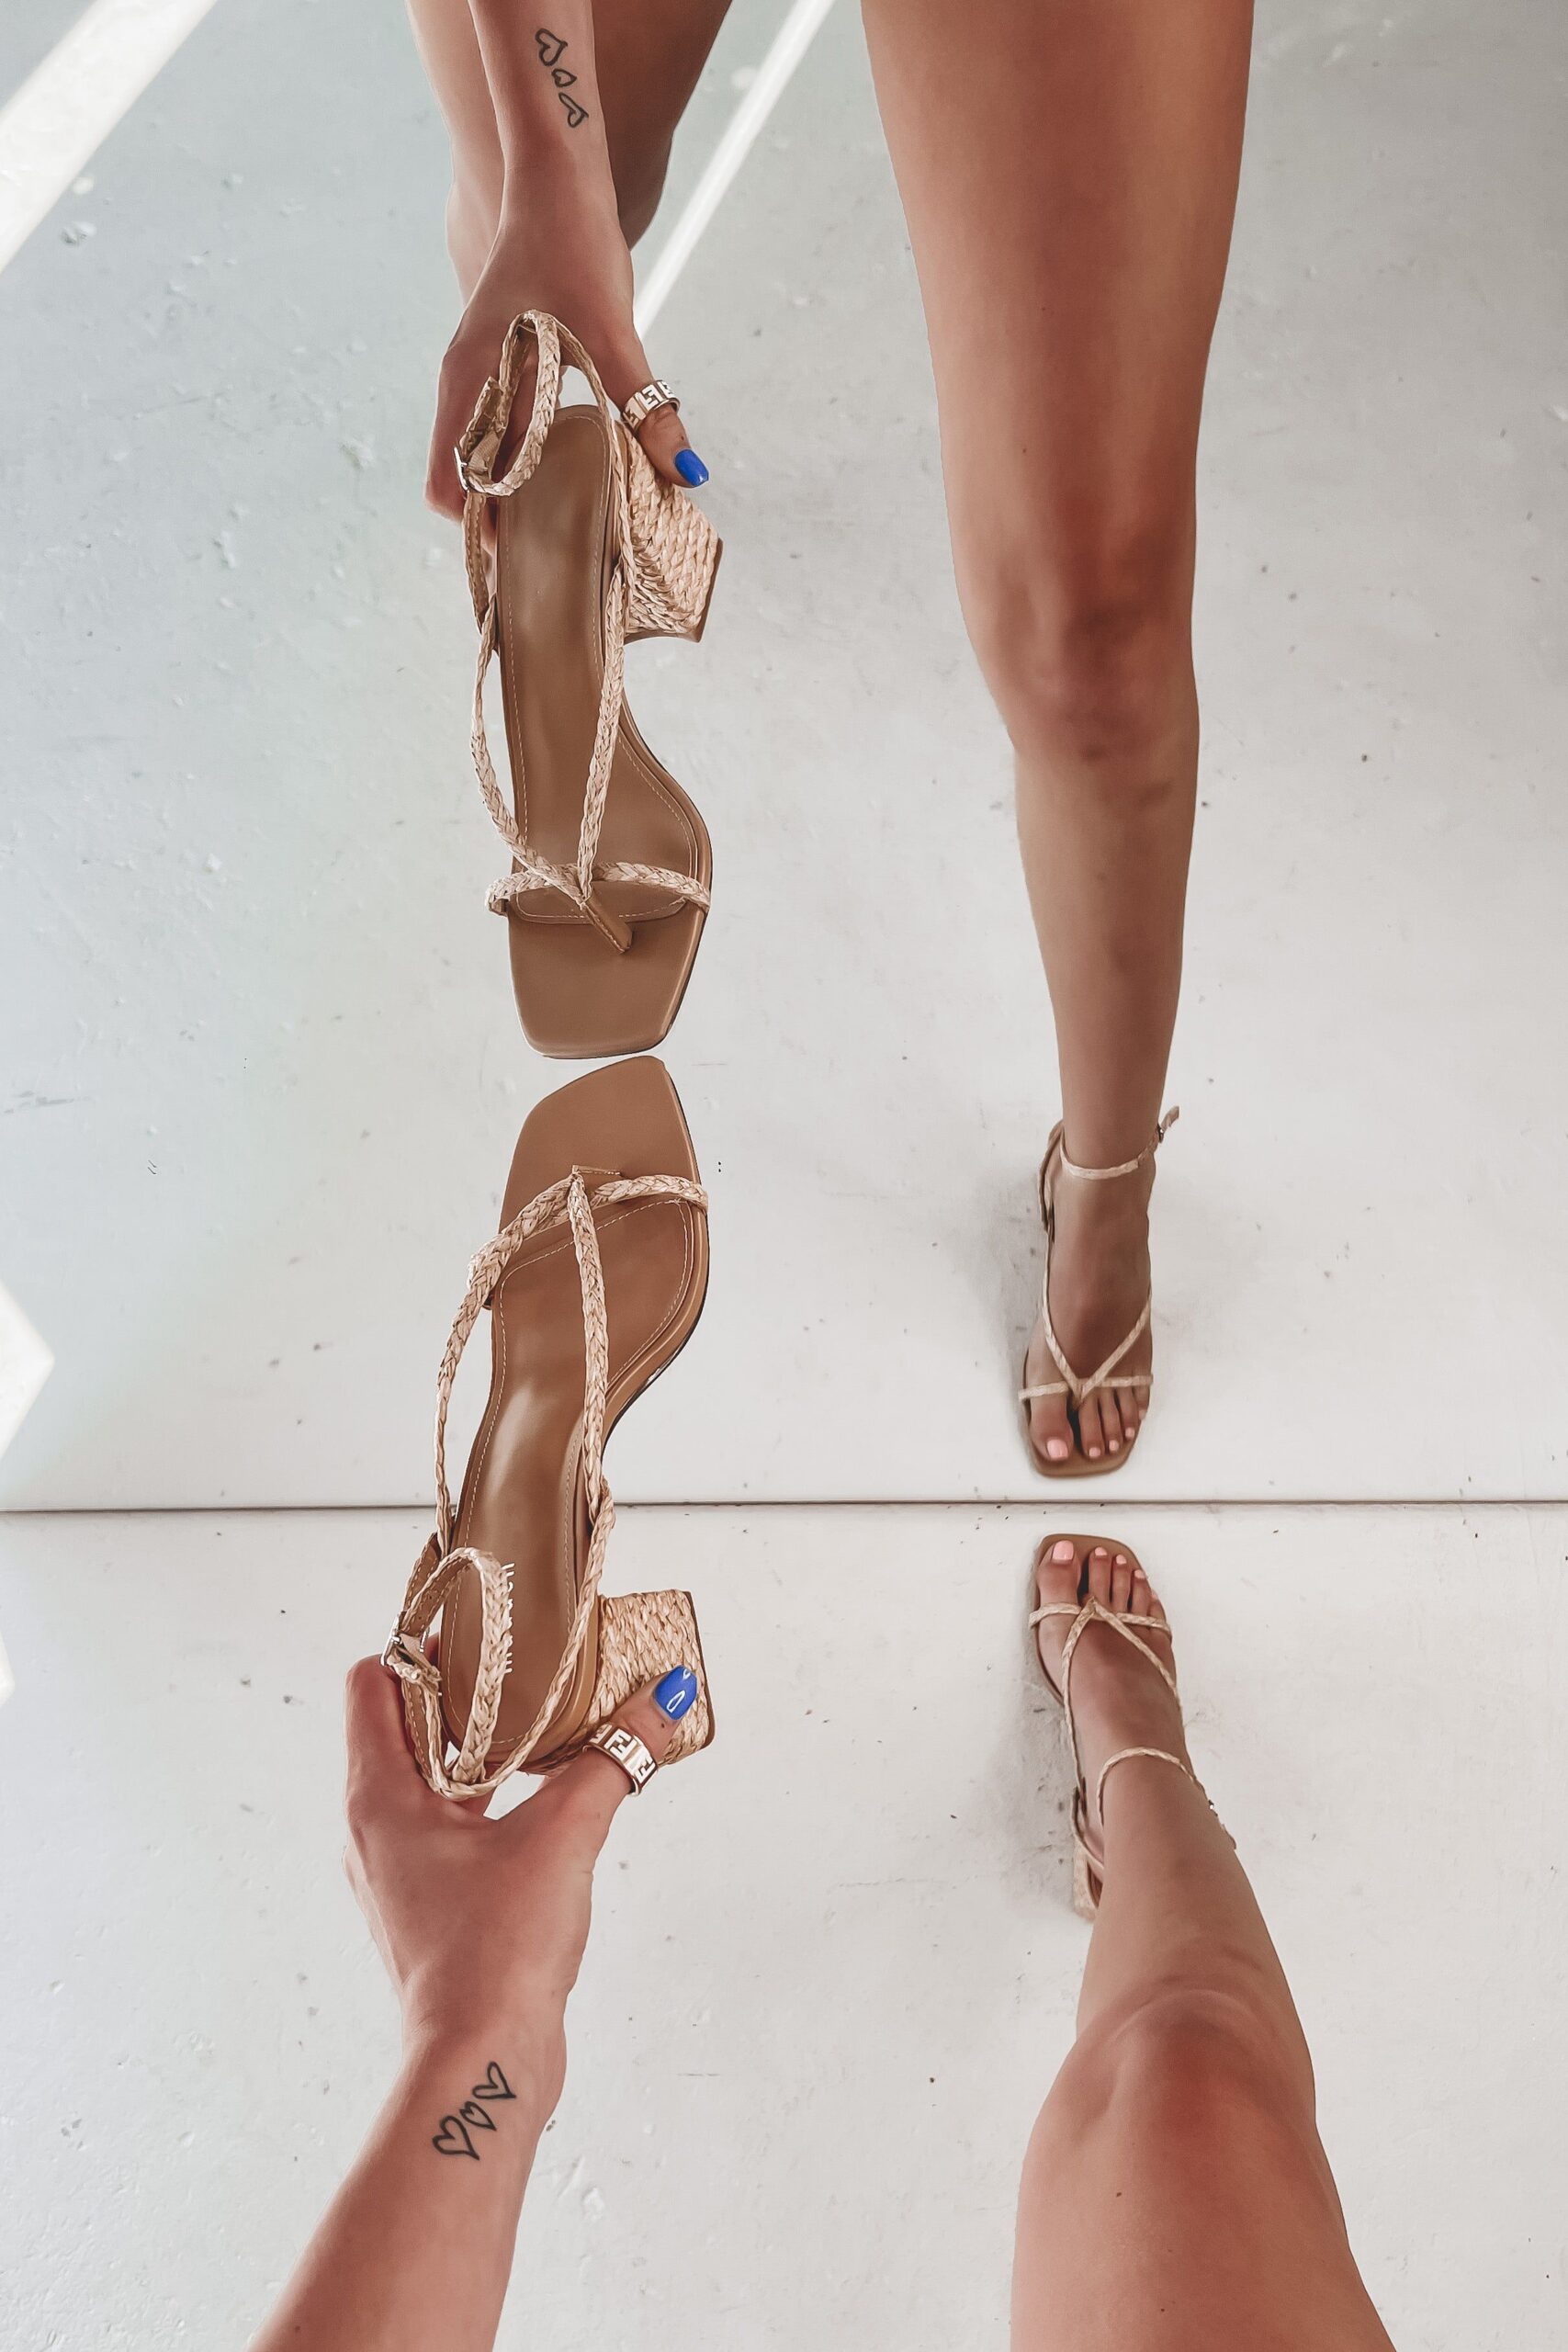 Beautiful Feet And Strappy Heels Sandals